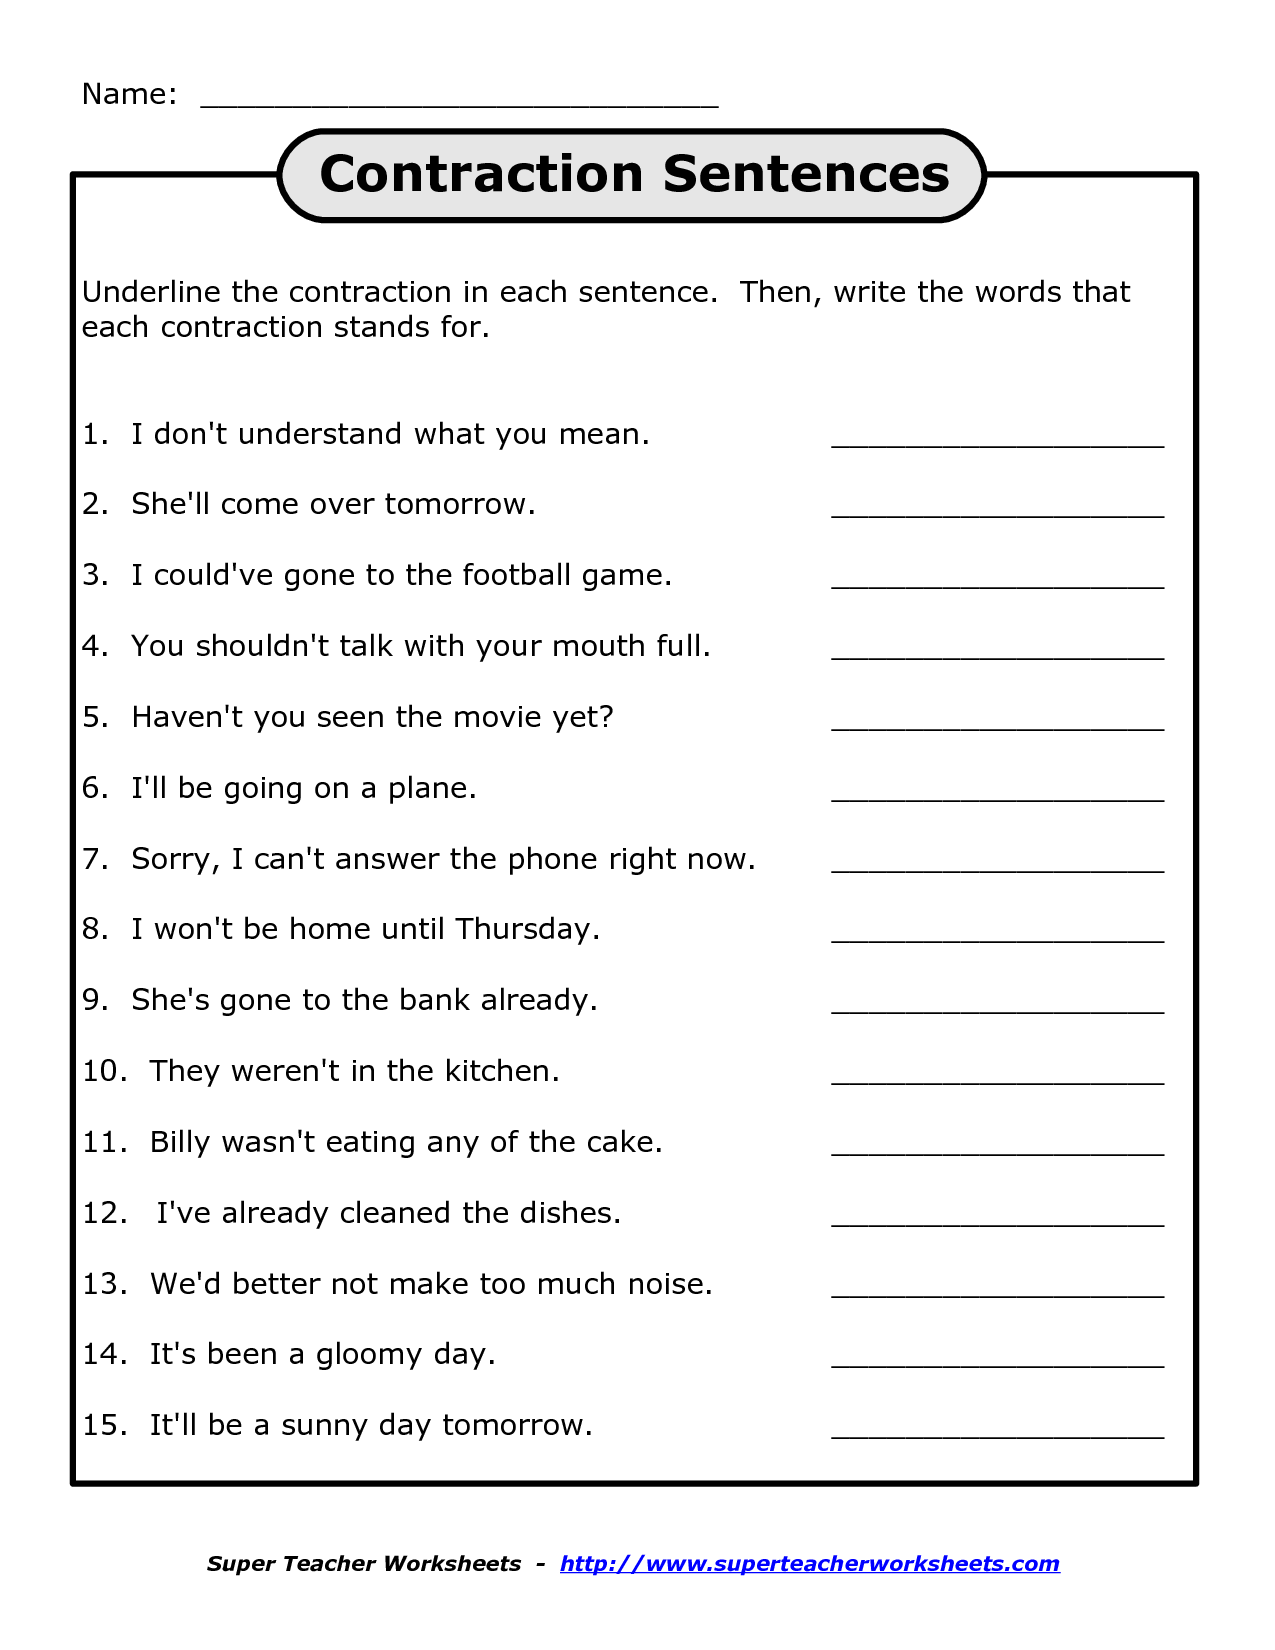 12-best-images-of-contractions-using-not-worksheets-contractions-worksheet-contraction